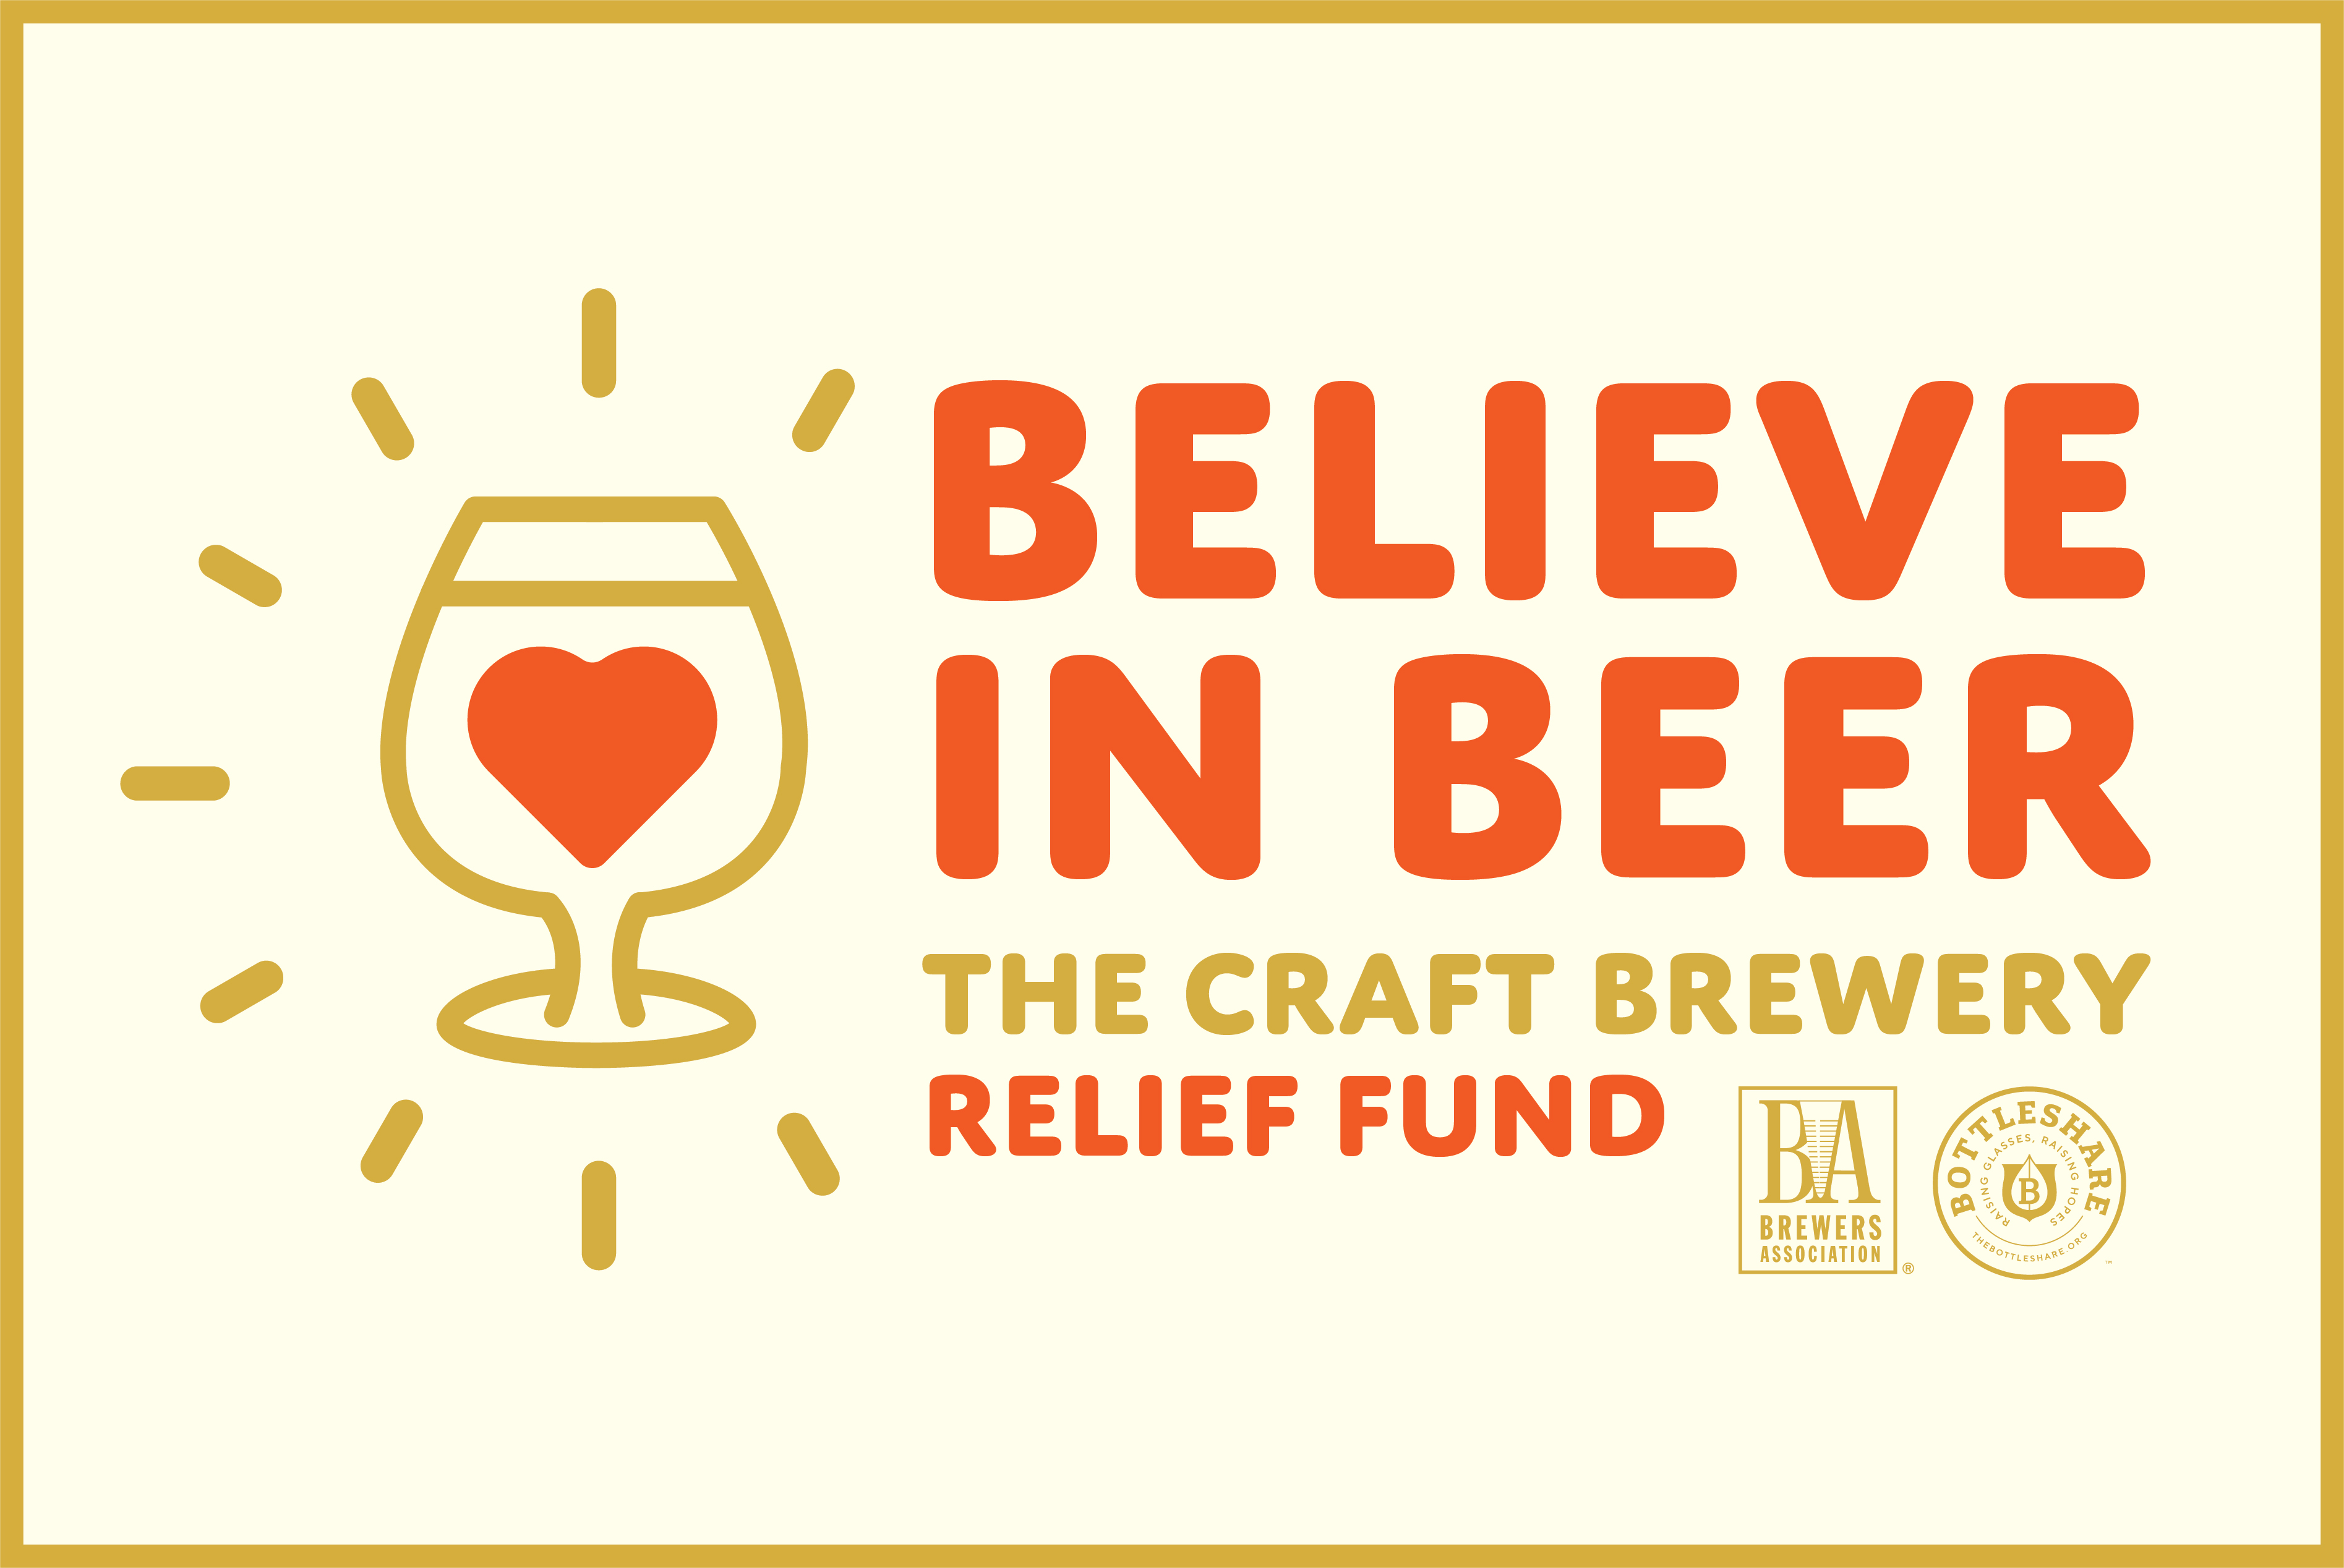 Brewers Association partners with Bottleshare to create Believe in Beer Relief Fund